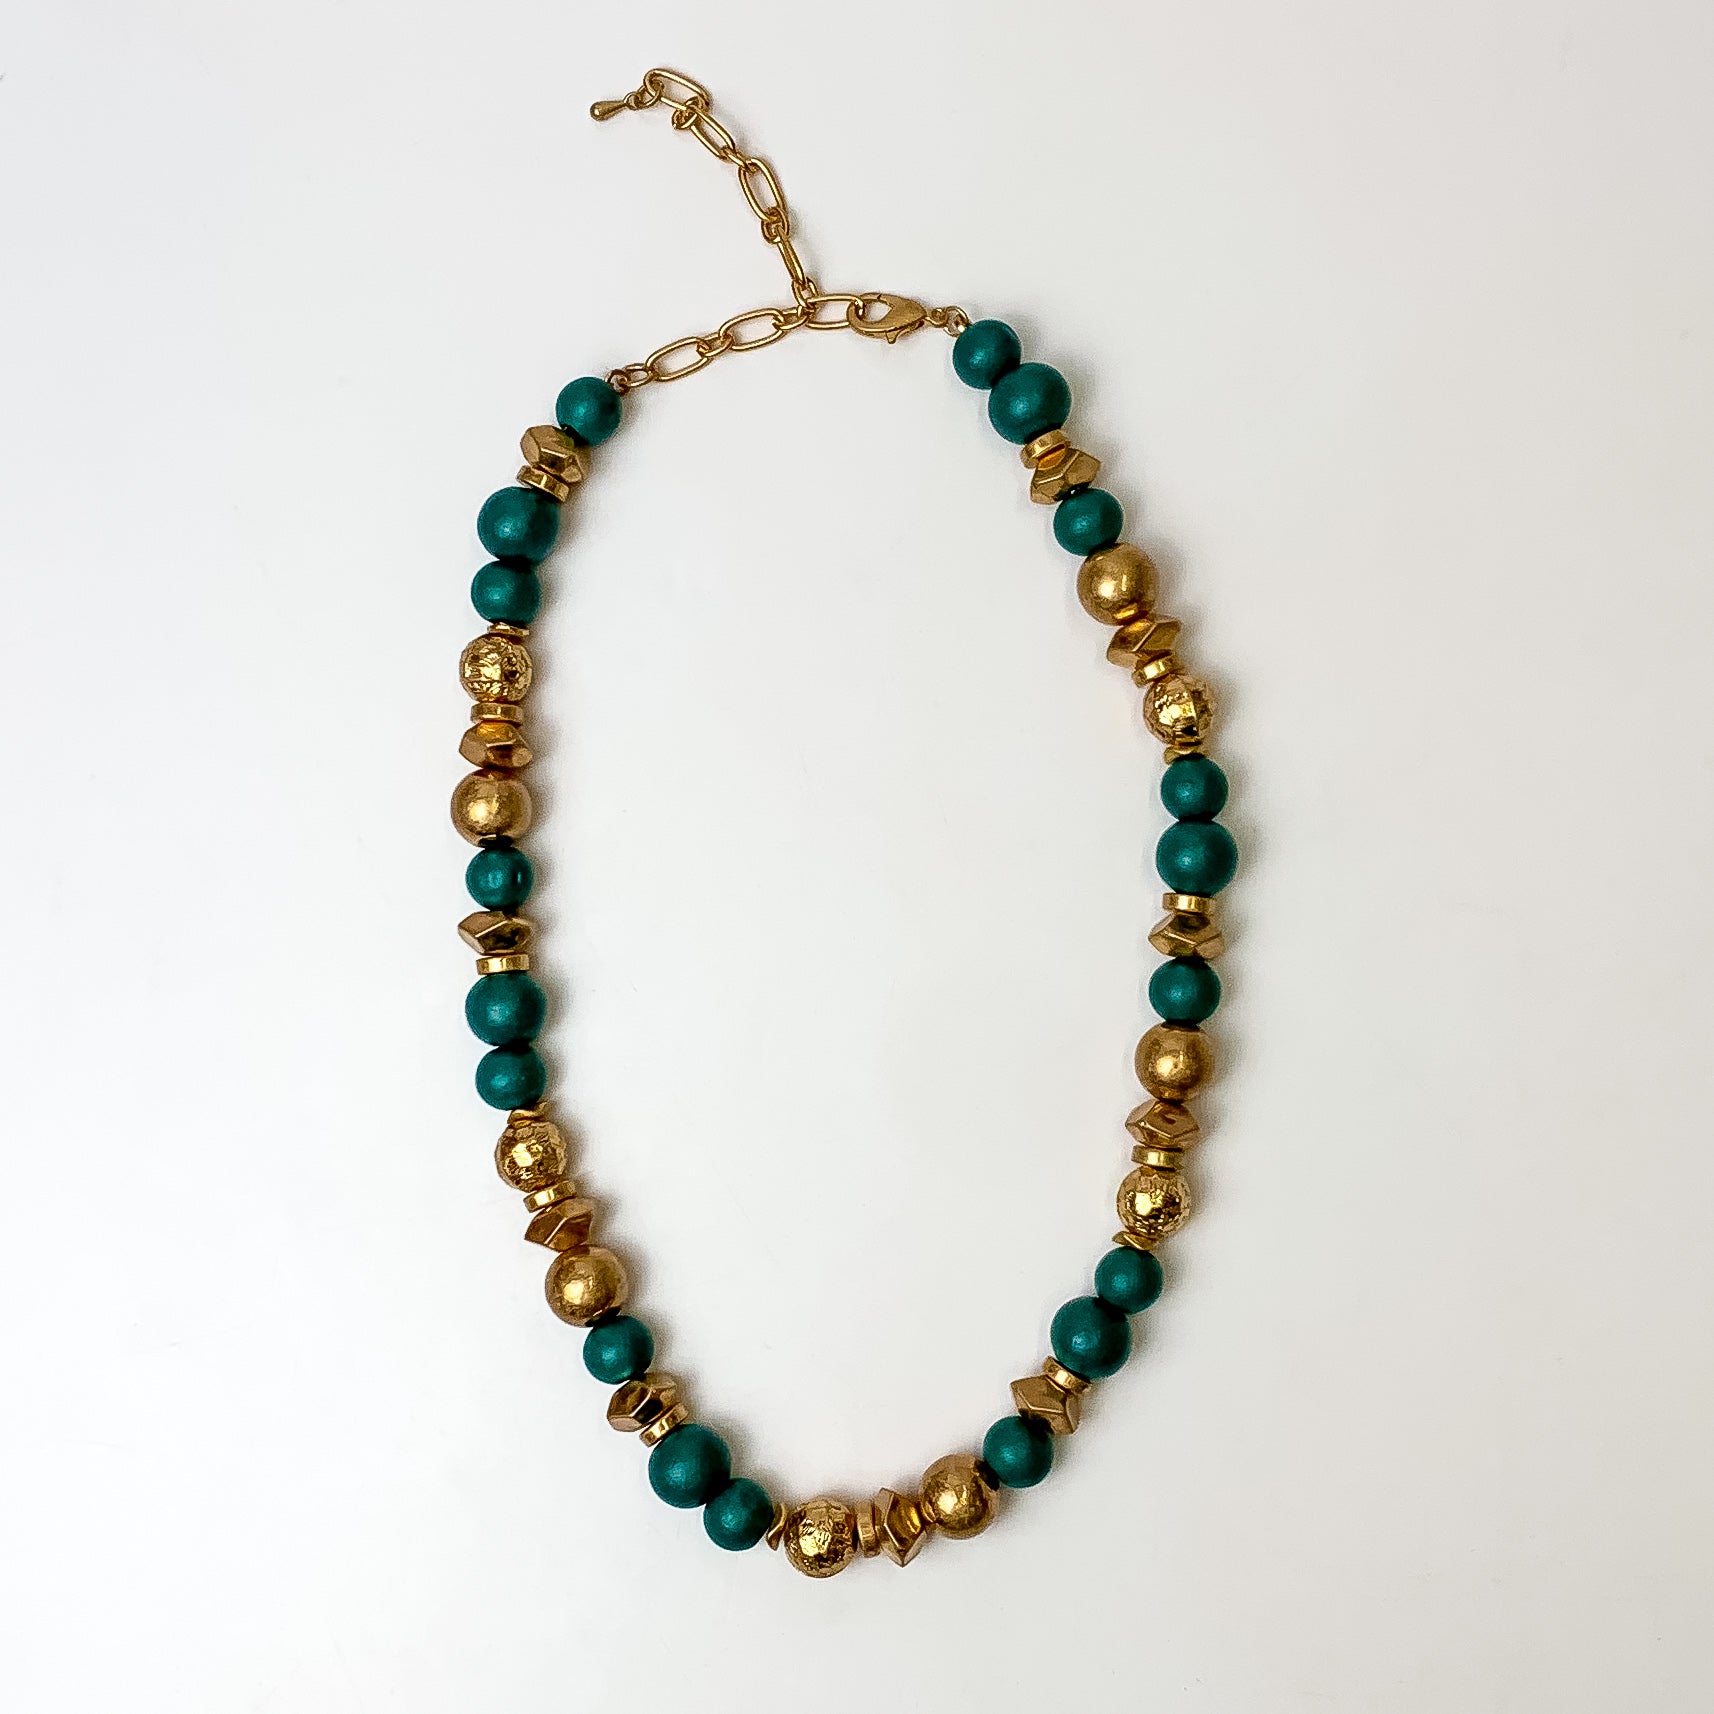 This texture beaded necklace with gold tone and chlorine blue beads are placed on a white background.